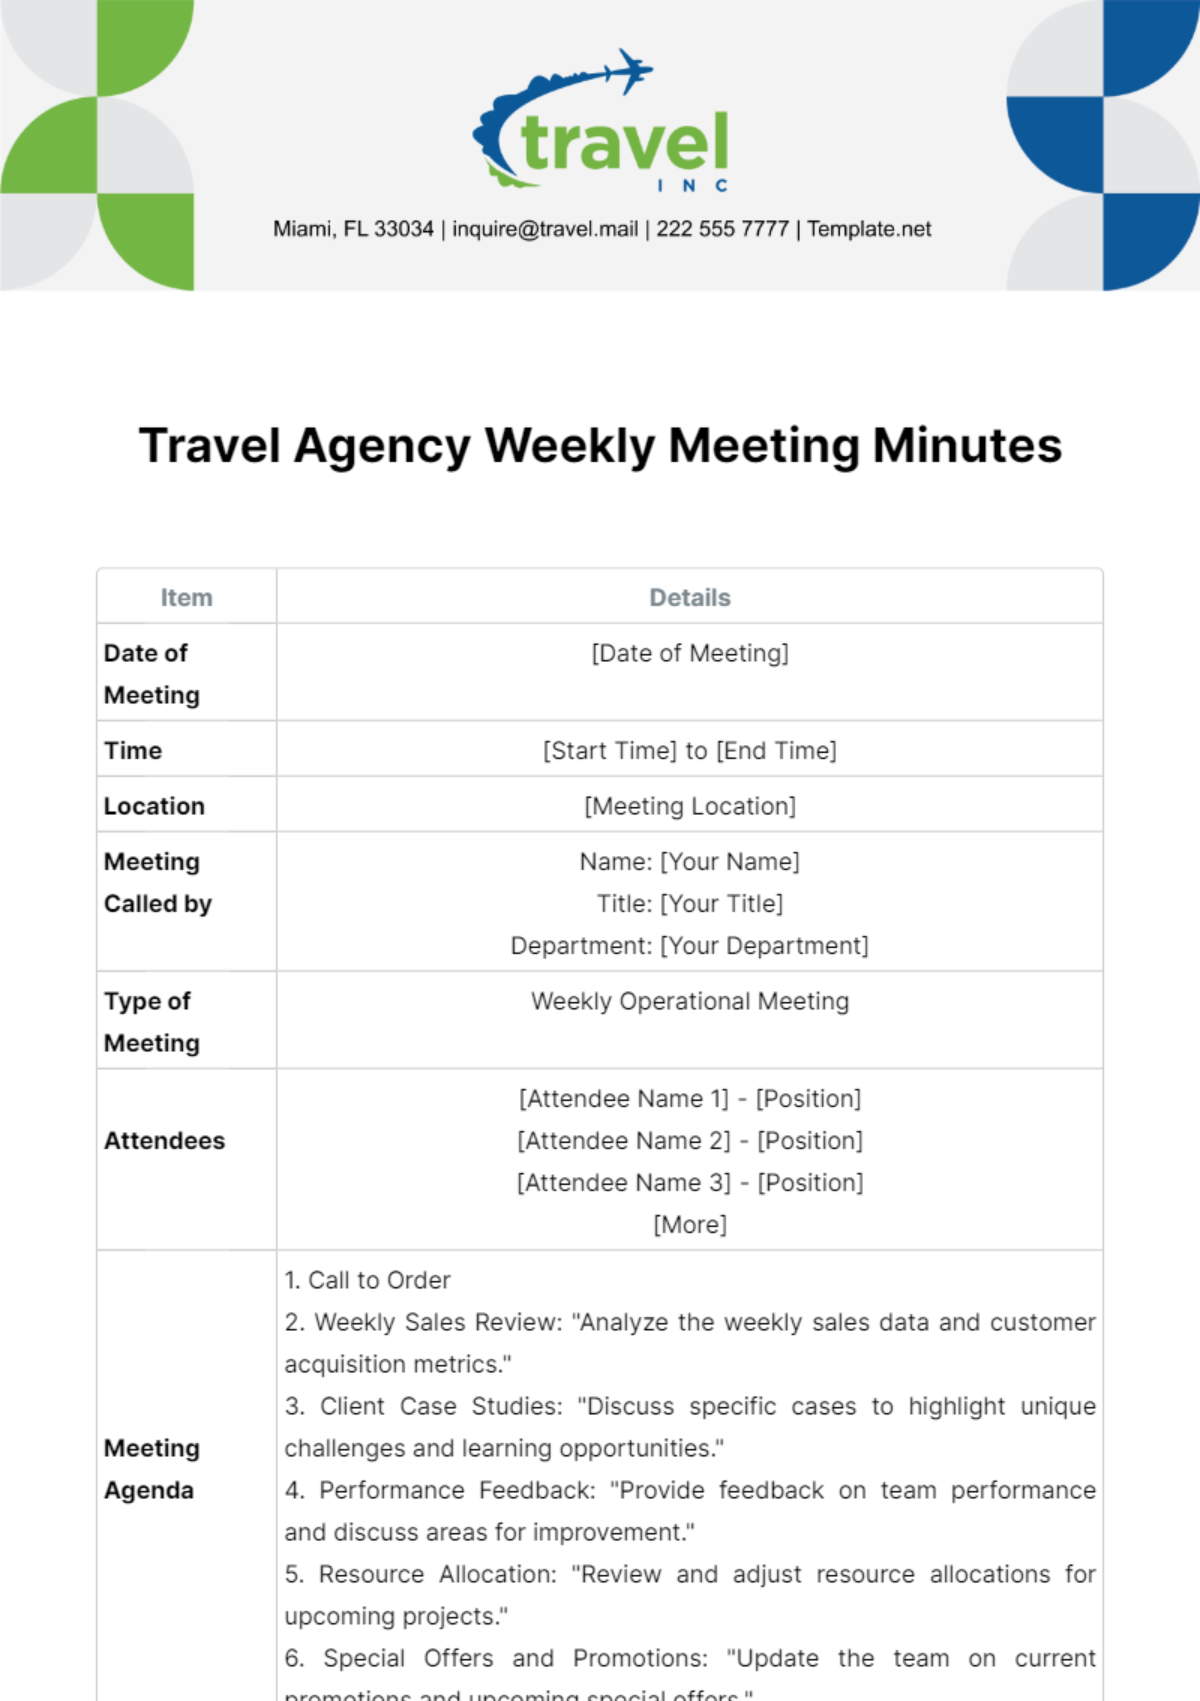 Travel Agency Weekly Meeting Minutes Template